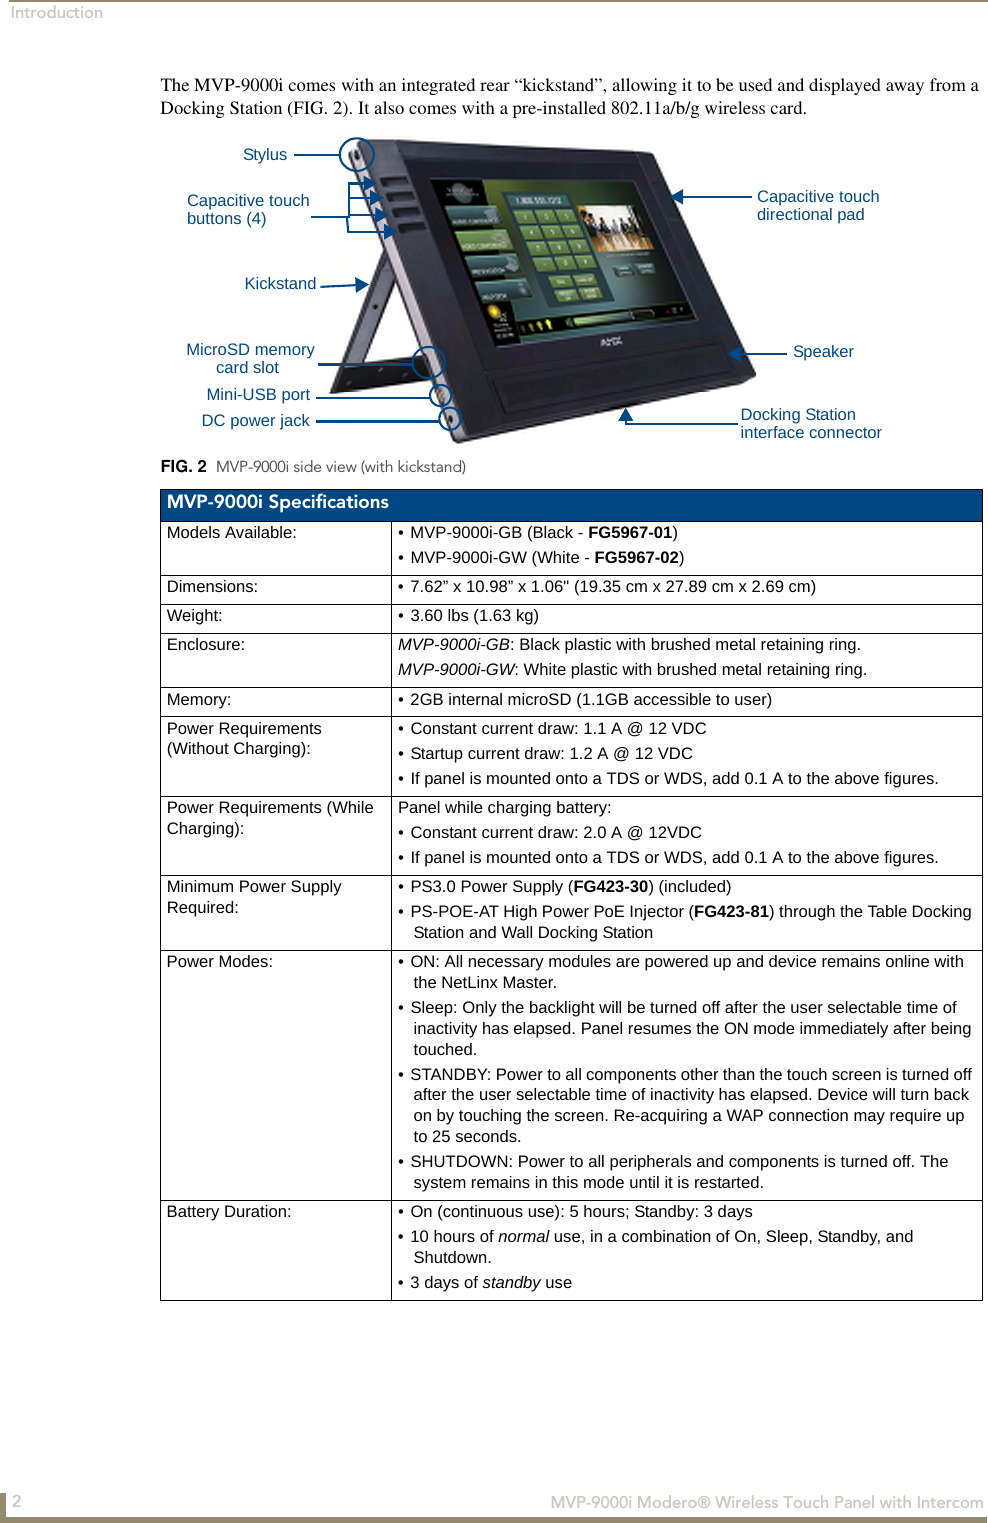 Introduction2 MVP-9000i Modero® Wireless Touch Panel with IntercomThe MVP-9000i comes with an integrated rear “kickstand”, allowing it to be used and displayed away from a Docking Station (FIG. 2). It also comes with a pre-installed 802.11a/b/g wireless card.      FIG. 2  MVP-9000i side view (with kickstand)MVP-9000i Specifications Models Available:  • MVP-9000i-GB (Black - FG5967-01)• MVP-9000i-GW (White - FG5967-02)Dimensions: • 7.62” x 10.98” x 1.06&quot; (19.35 cm x 27.89 cm x 2.69 cm)Weight: • 3.60 lbs (1.63 kg)Enclosure: MVP-9000i-GB: Black plastic with brushed metal retaining ring.MVP-9000i-GW: White plastic with brushed metal retaining ring.Memory: • 2GB internal microSD (1.1GB accessible to user)Power Requirements(Without Charging):• Constant current draw: 1.1 A @ 12 VDC• Startup current draw: 1.2 A @ 12 VDC• If panel is mounted onto a TDS or WDS, add 0.1 A to the above figures.Power Requirements (While Charging):Panel while charging battery:• Constant current draw: 2.0 A @ 12VDC• If panel is mounted onto a TDS or WDS, add 0.1 A to the above figures.Minimum Power Supply Required:• PS3.0 Power Supply (FG423-30) (included)• PS-POE-AT High Power PoE Injector (FG423-81) through the Table Docking Station and Wall Docking StationPower Modes: • ON: All necessary modules are powered up and device remains online with the NetLinx Master.• Sleep: Only the backlight will be turned off after the user selectable time of inactivity has elapsed. Panel resumes the ON mode immediately after being touched.• STANDBY: Power to all components other than the touch screen is turned off after the user selectable time of inactivity has elapsed. Device will turn back on by touching the screen. Re-acquiring a WAP connection may require up to 25 seconds.• SHUTDOWN: Power to all peripherals and components is turned off. The system remains in this mode until it is restarted.Battery Duration: • On (continuous use): 5 hours; Standby: 3 days • 10 hours of normal use, in a combination of On, Sleep, Standby, and Shutdown.• 3 days of standby useKickstandMini-USB portDC power jackMicroSD memorycard slotDocking Stationinterface connectorStylusSpeakerCapacitive touchCapacitive touchbuttons (4) directional pad